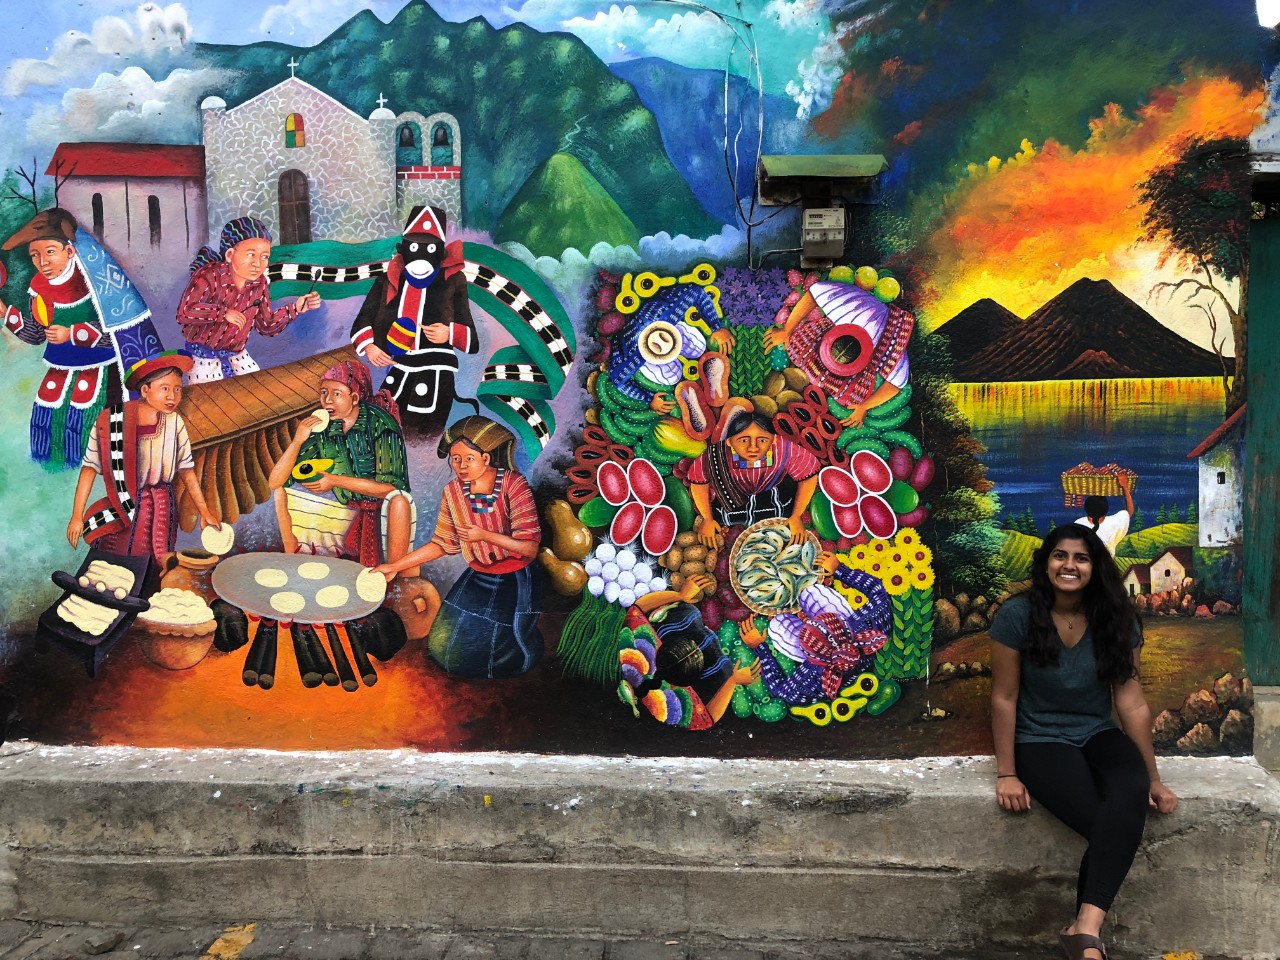 A&S and College of Medicine graduate Priyanka Sai Vemuru in Guatemala where she volunteered to work with people with disabilities.